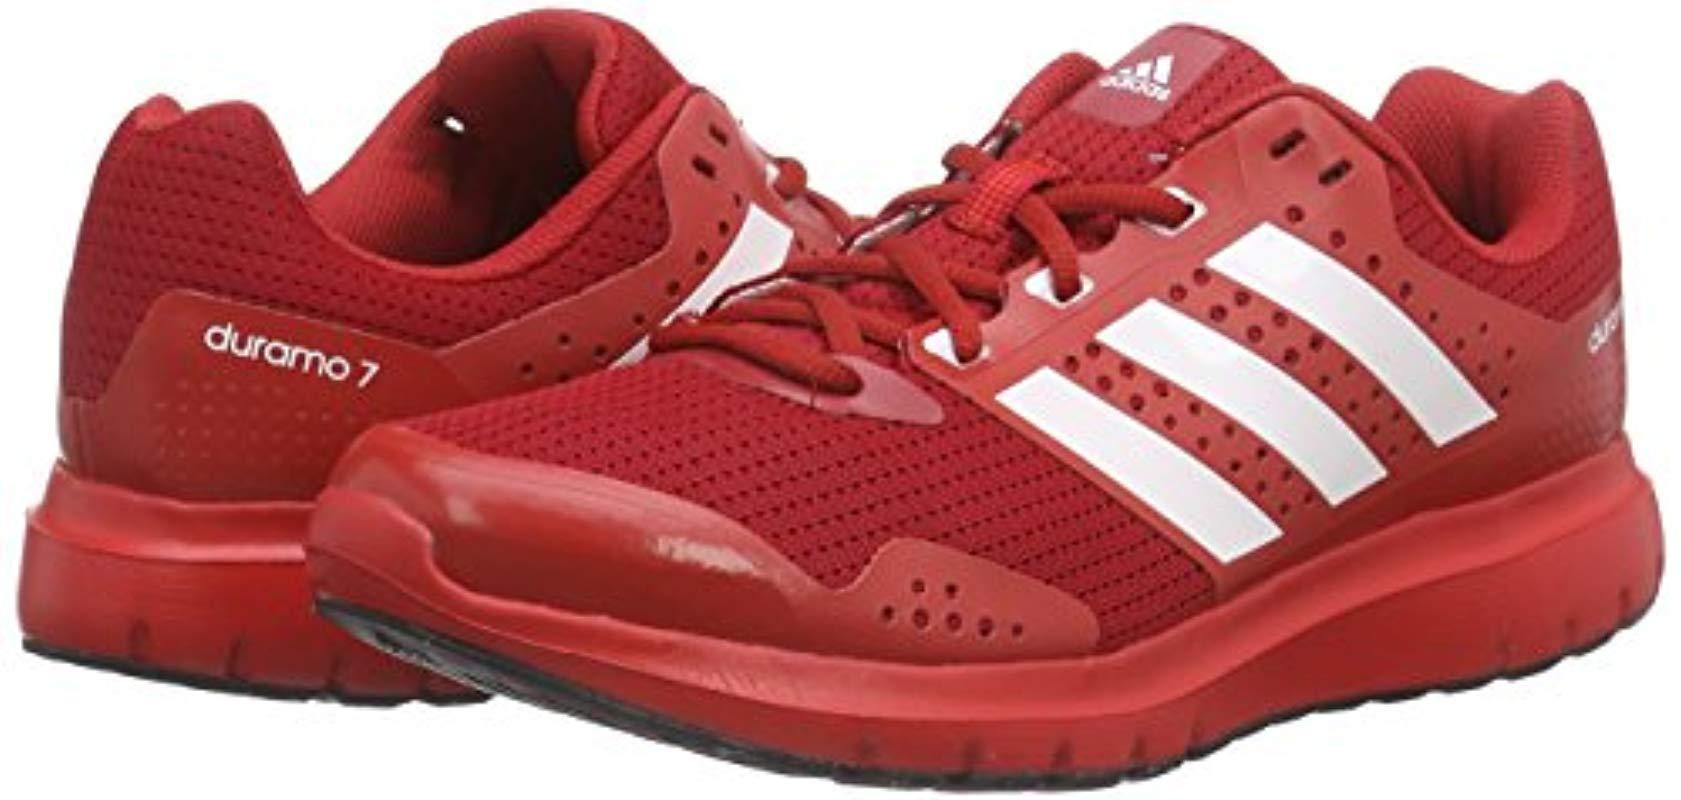 adidas Synthetic Duramo 7, Running Shoes, Red (vivid Red S13/ftwr  White/power Red), 7 Uk (40.5 Eu) for Men - Lyst